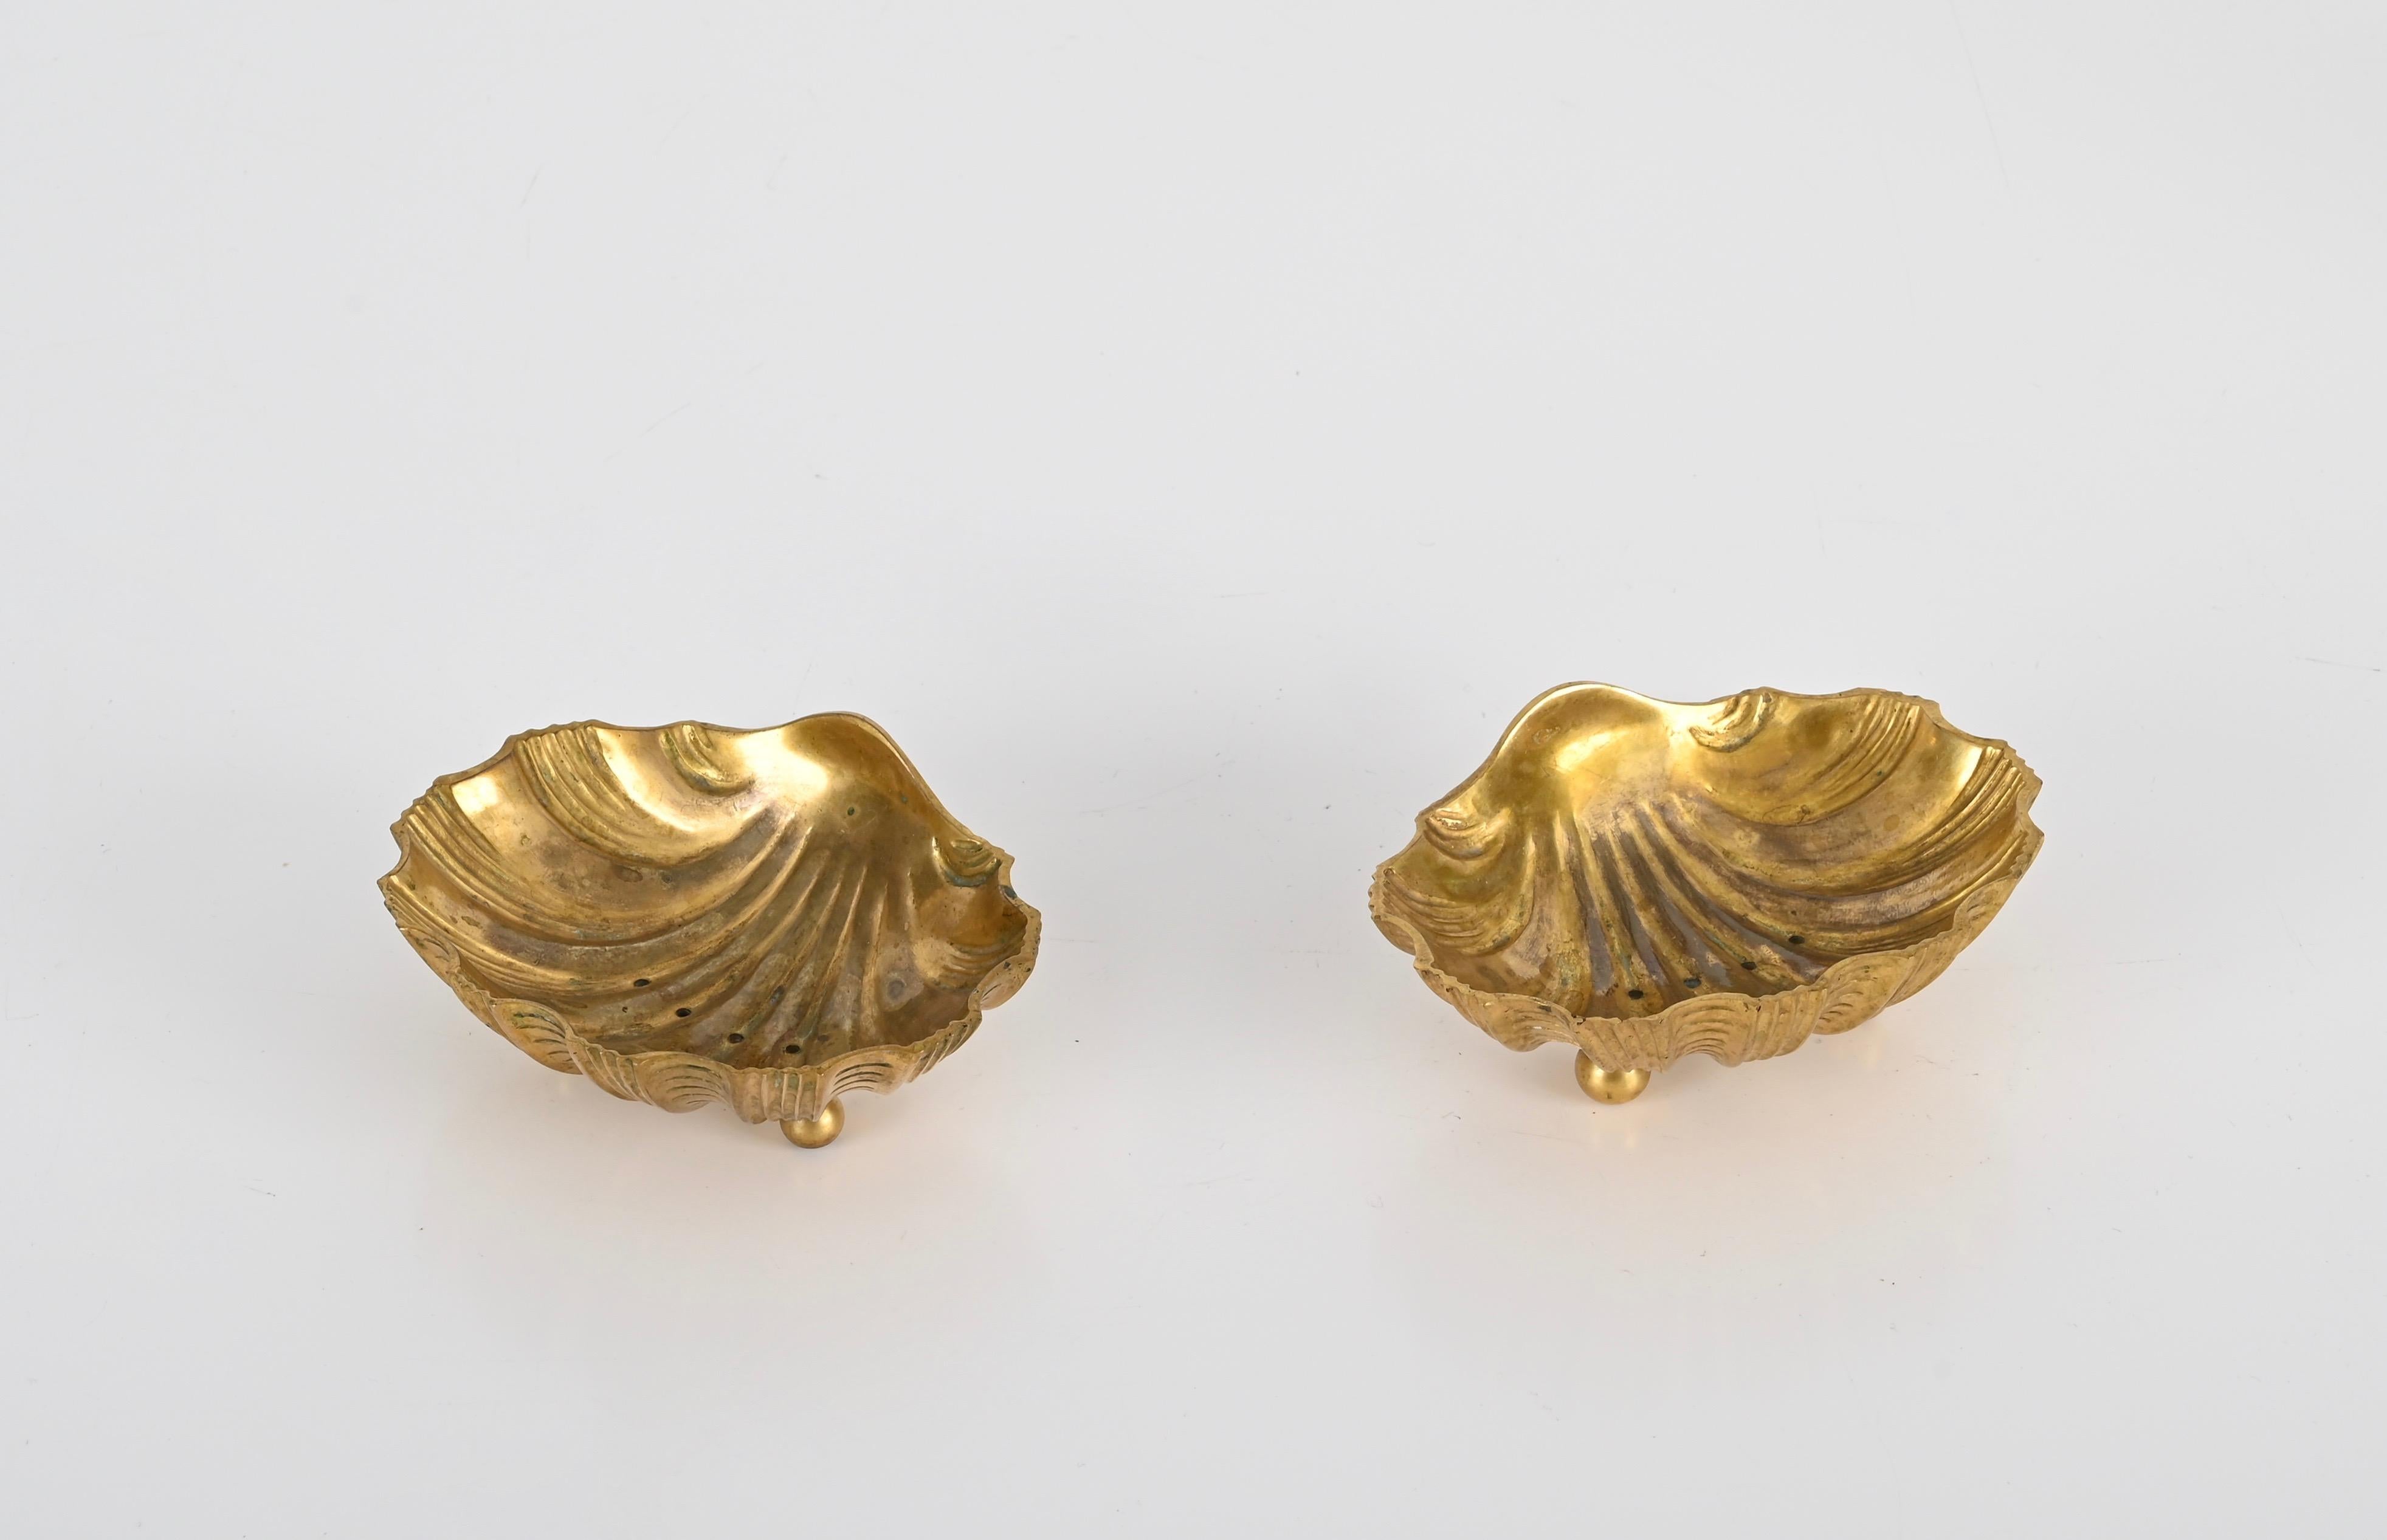 Stunning pair of shell-shaped soap dishes in gilt bronze. This fantastic Hollywood Regency style soap dishes were made in Italy during the 1950s.

The perfect details and the quality of the gilding on these soap dishes is outstanding.


An